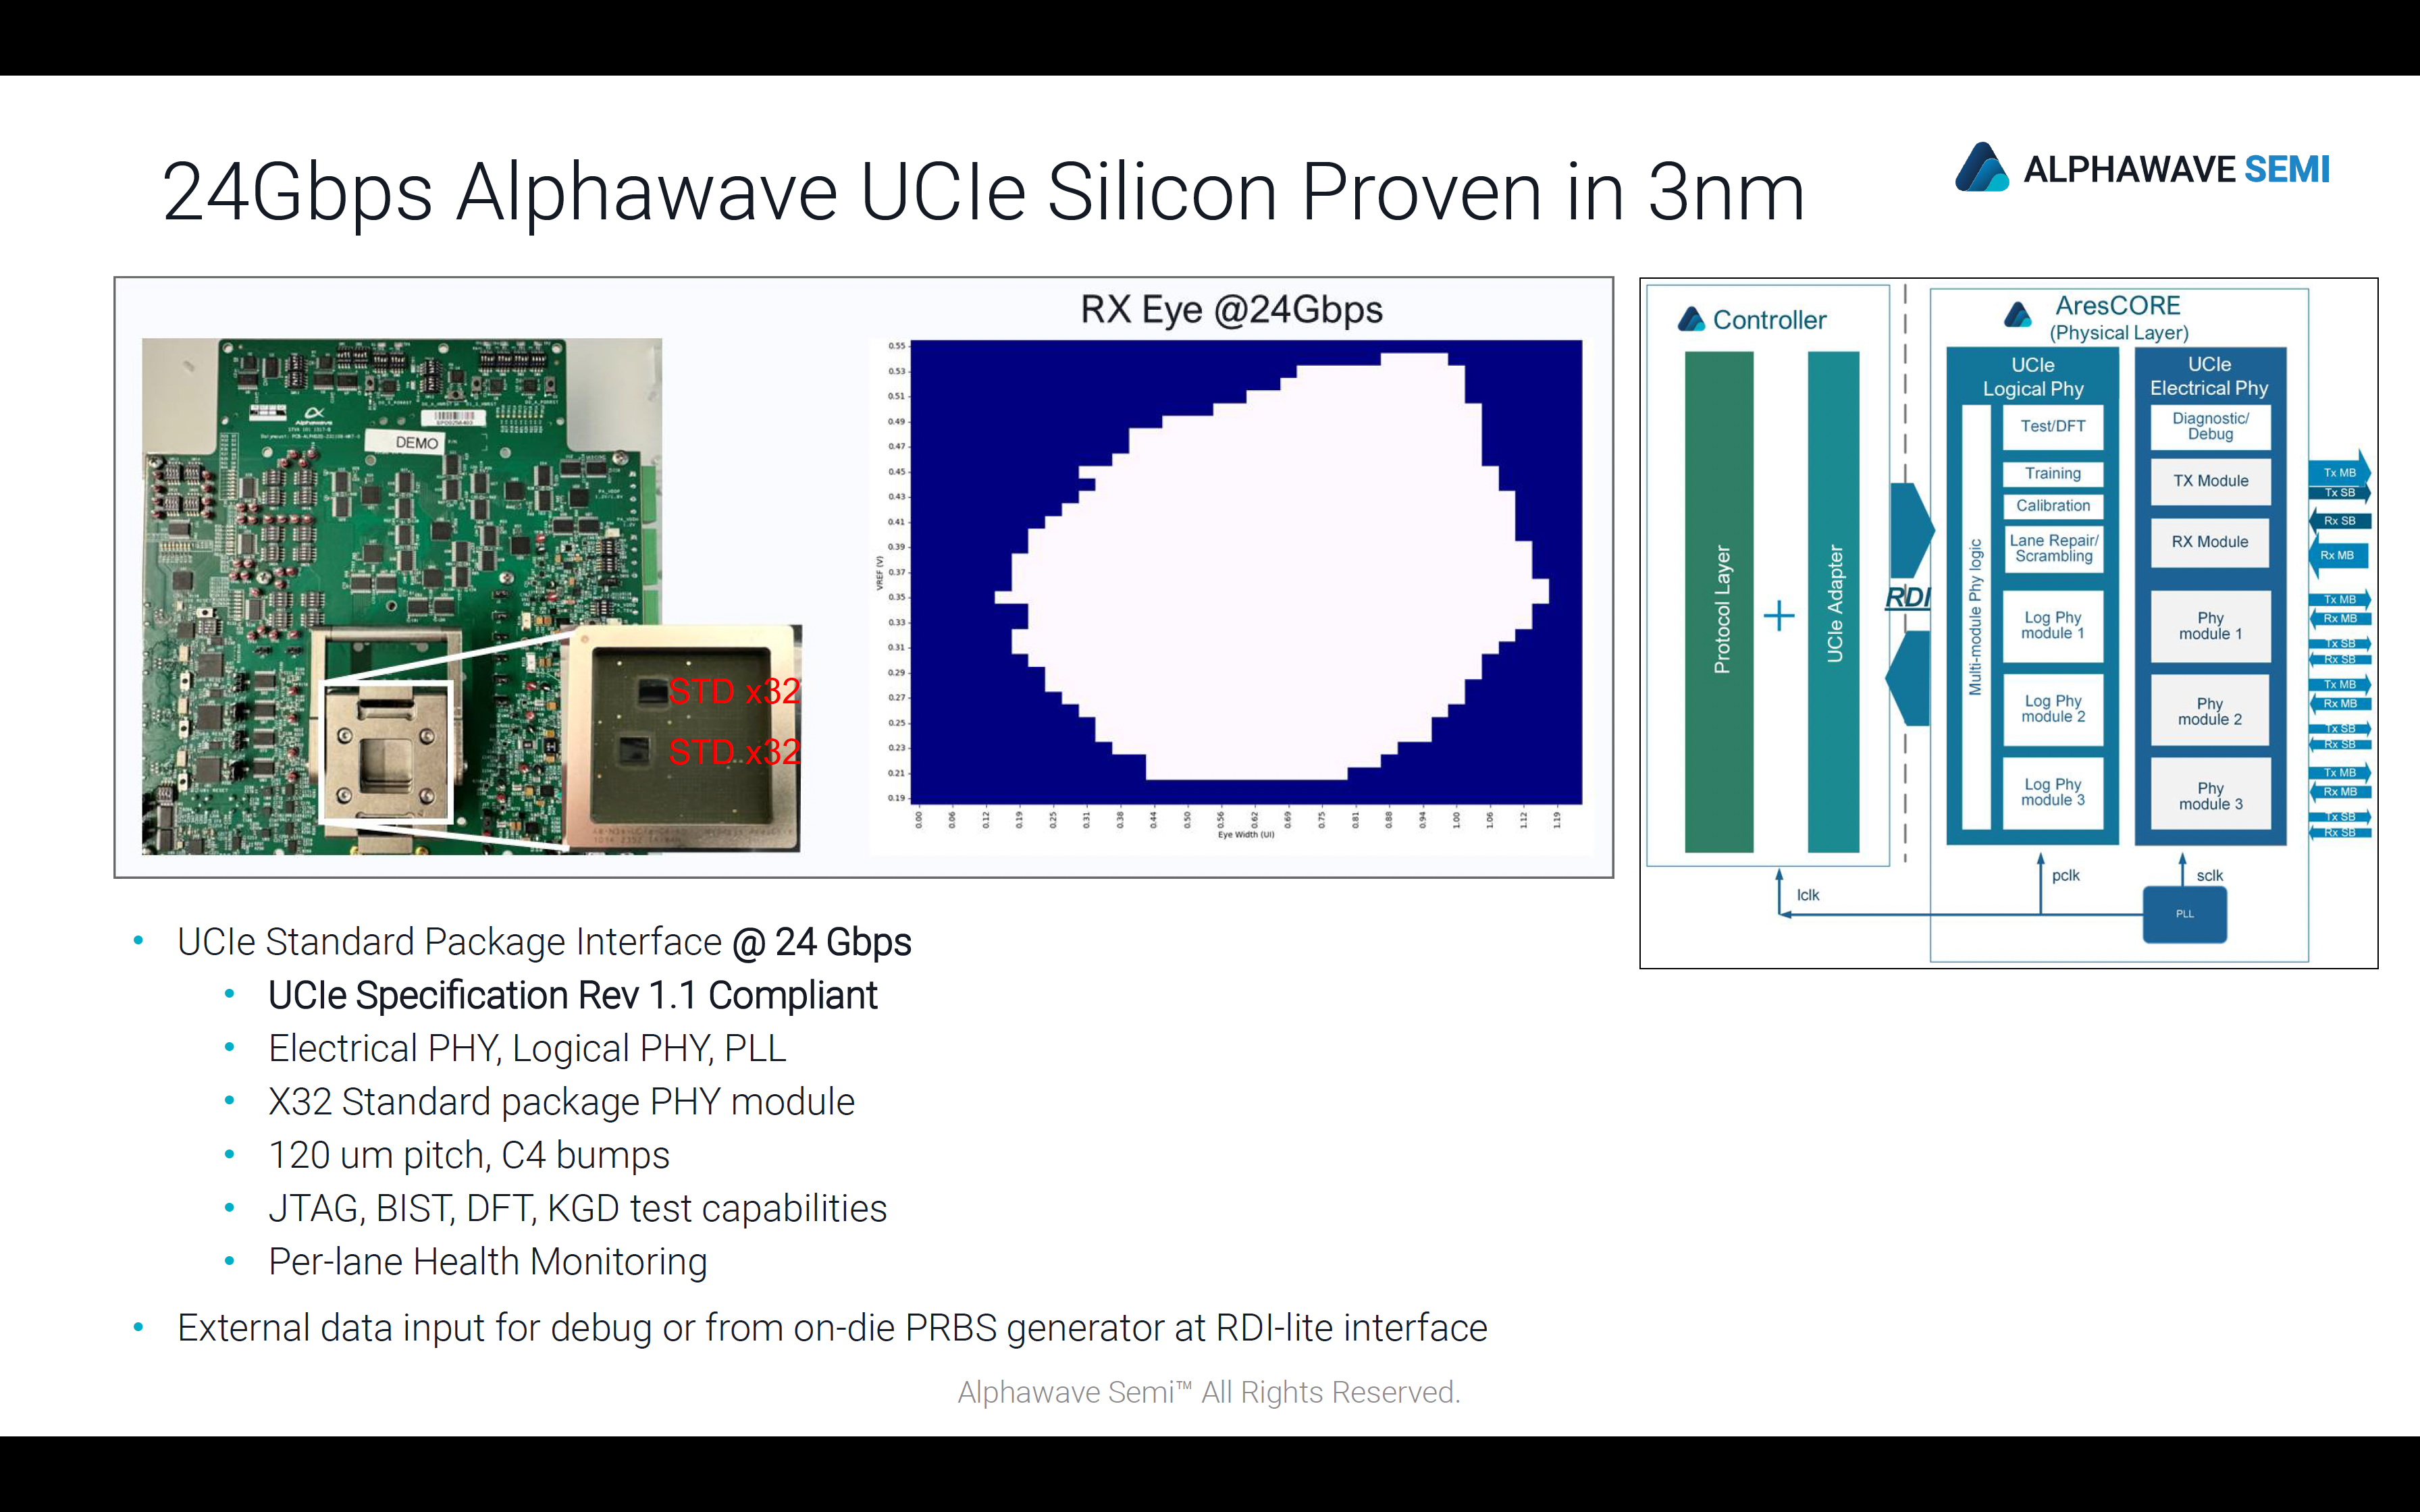 24Gbps Alphawave UCIe Silicon Proven in 3nm